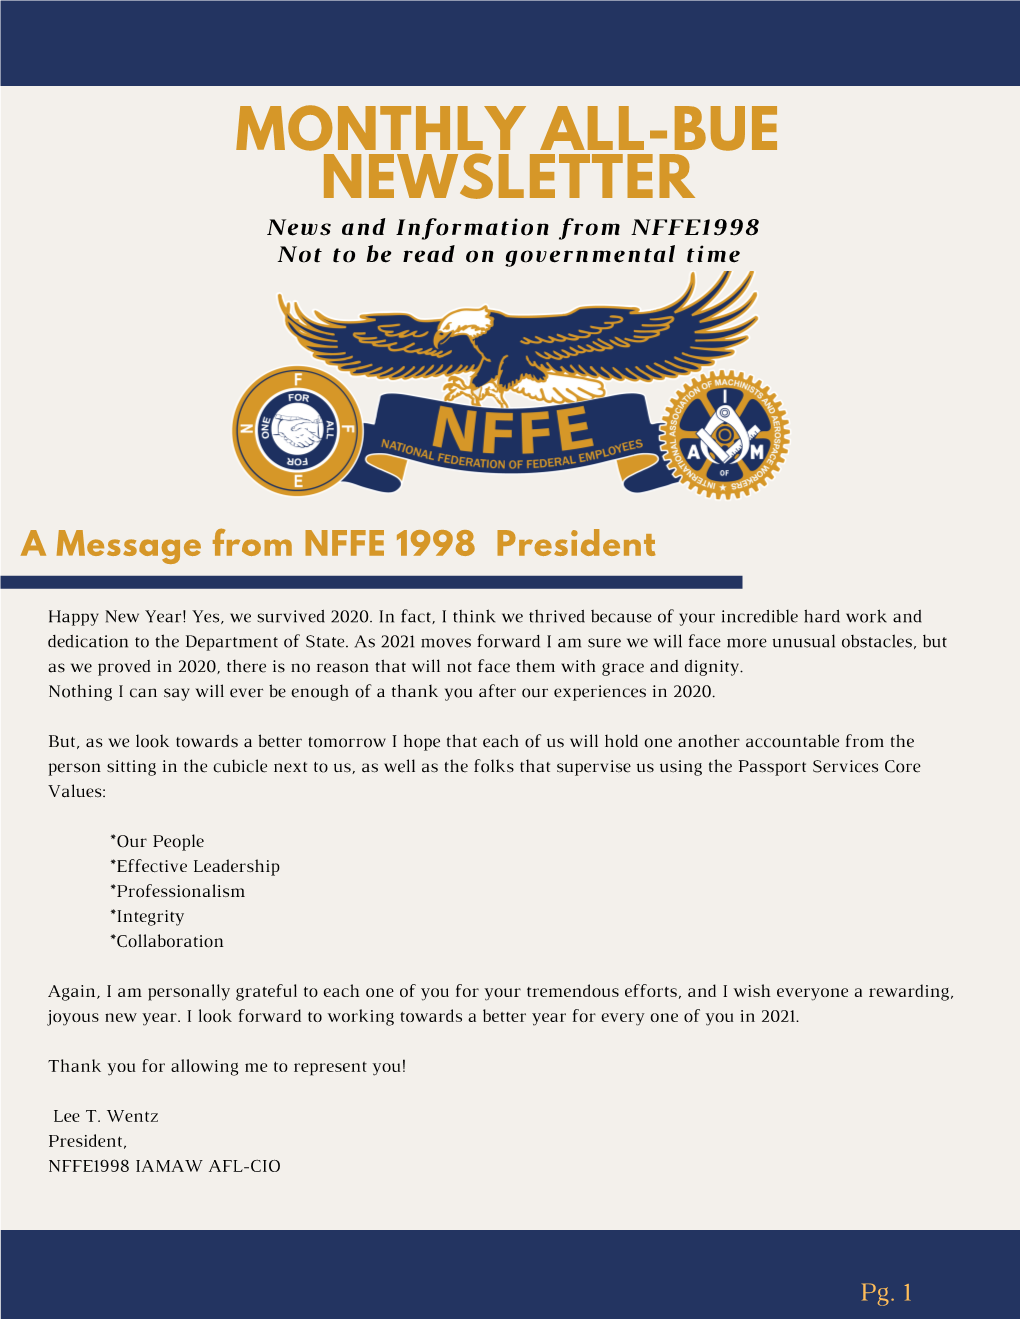 MONTHLY ALL-BUE NEWSLETTER News and Information from NFFE1998 Not to Be Read on Governmental Time